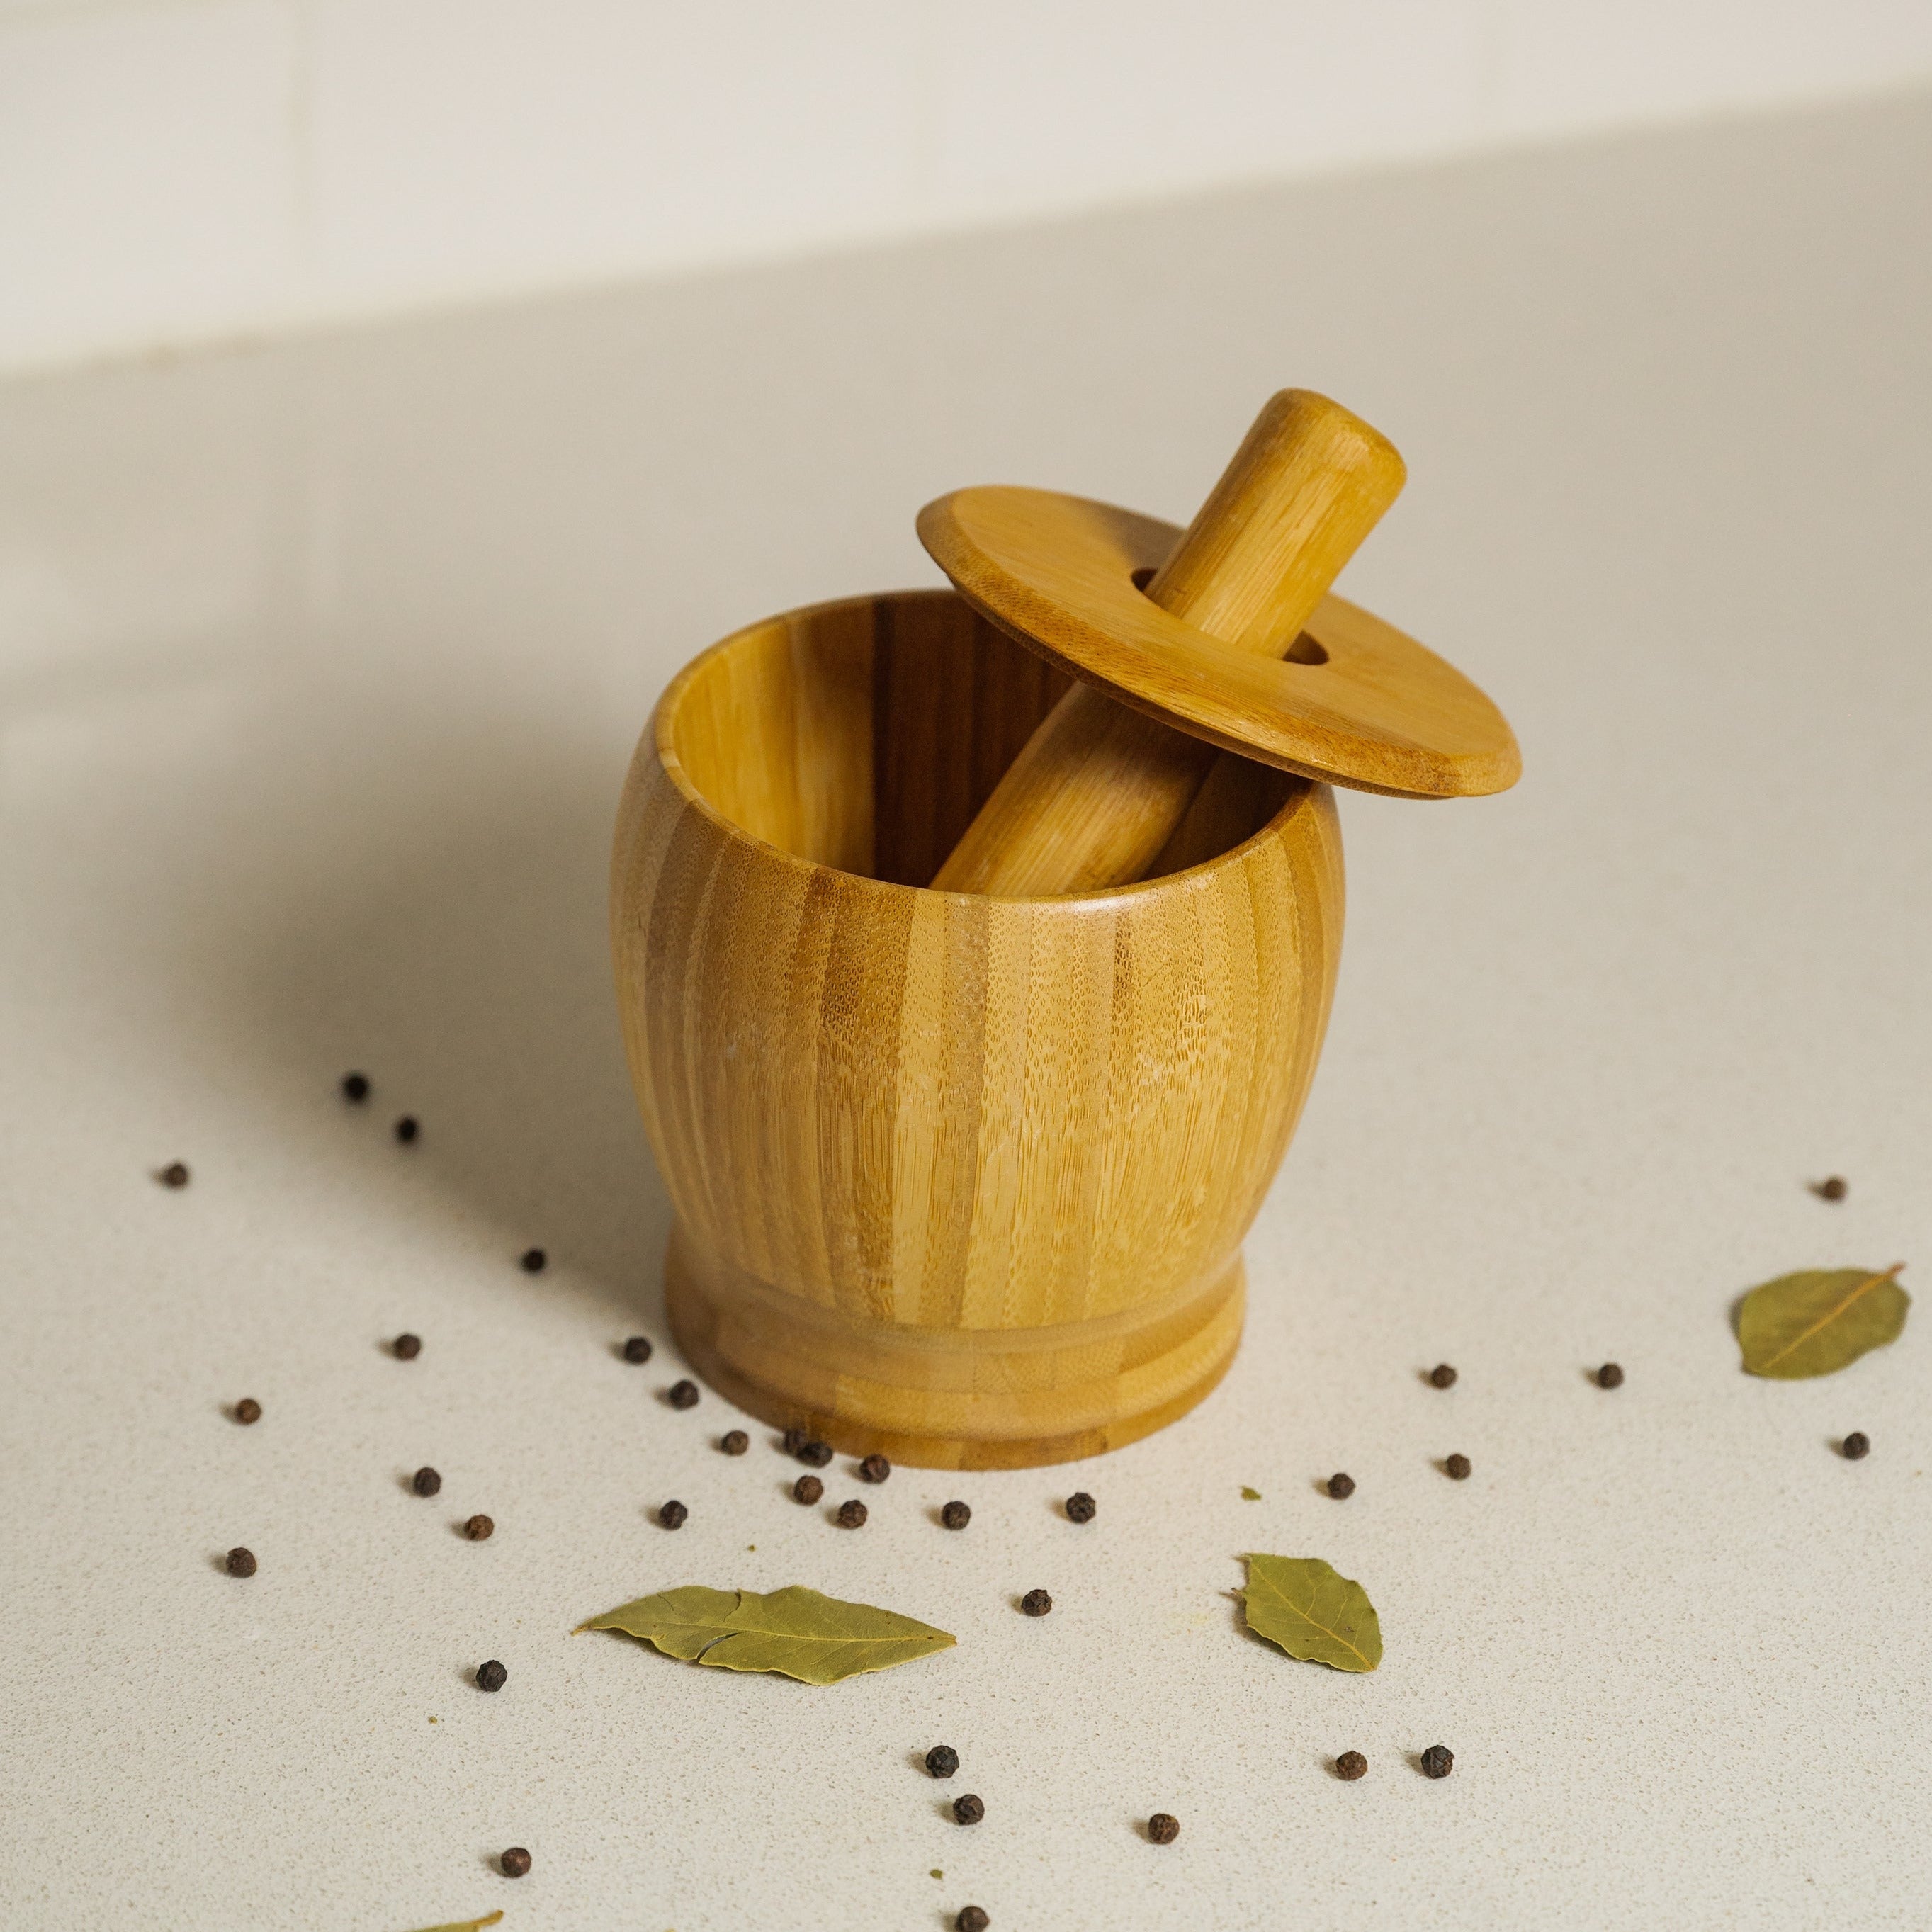 sustainable, zero waste, earth-friendly, plastic-free Bamboo Mortar & Pestle with Lid - Bamboo Switch